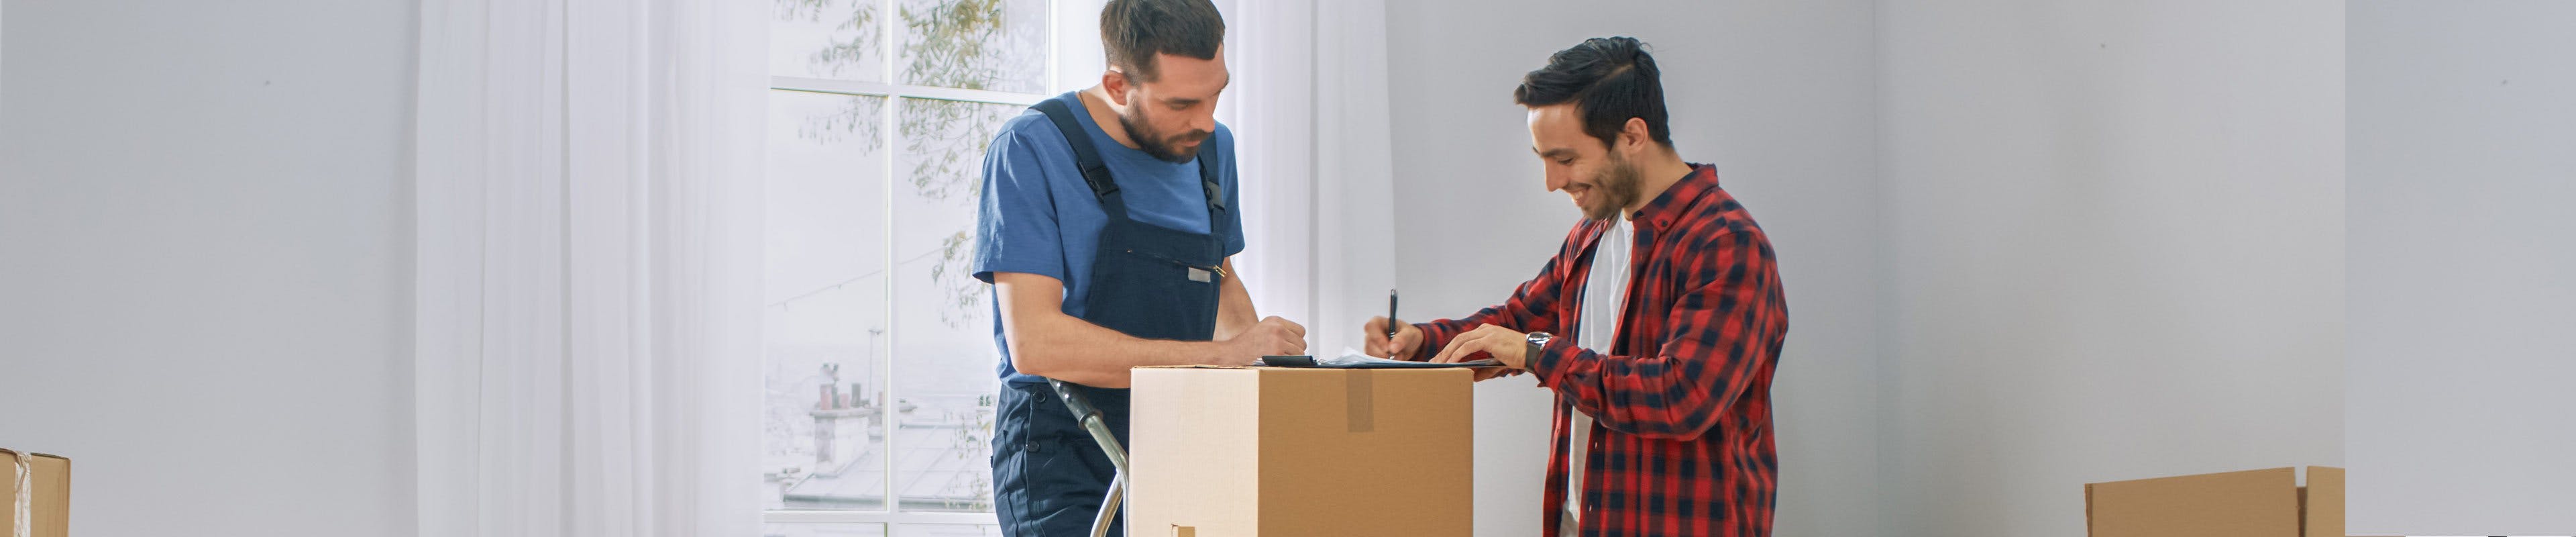 Image of a homeowner signing a moving contract with a mover.